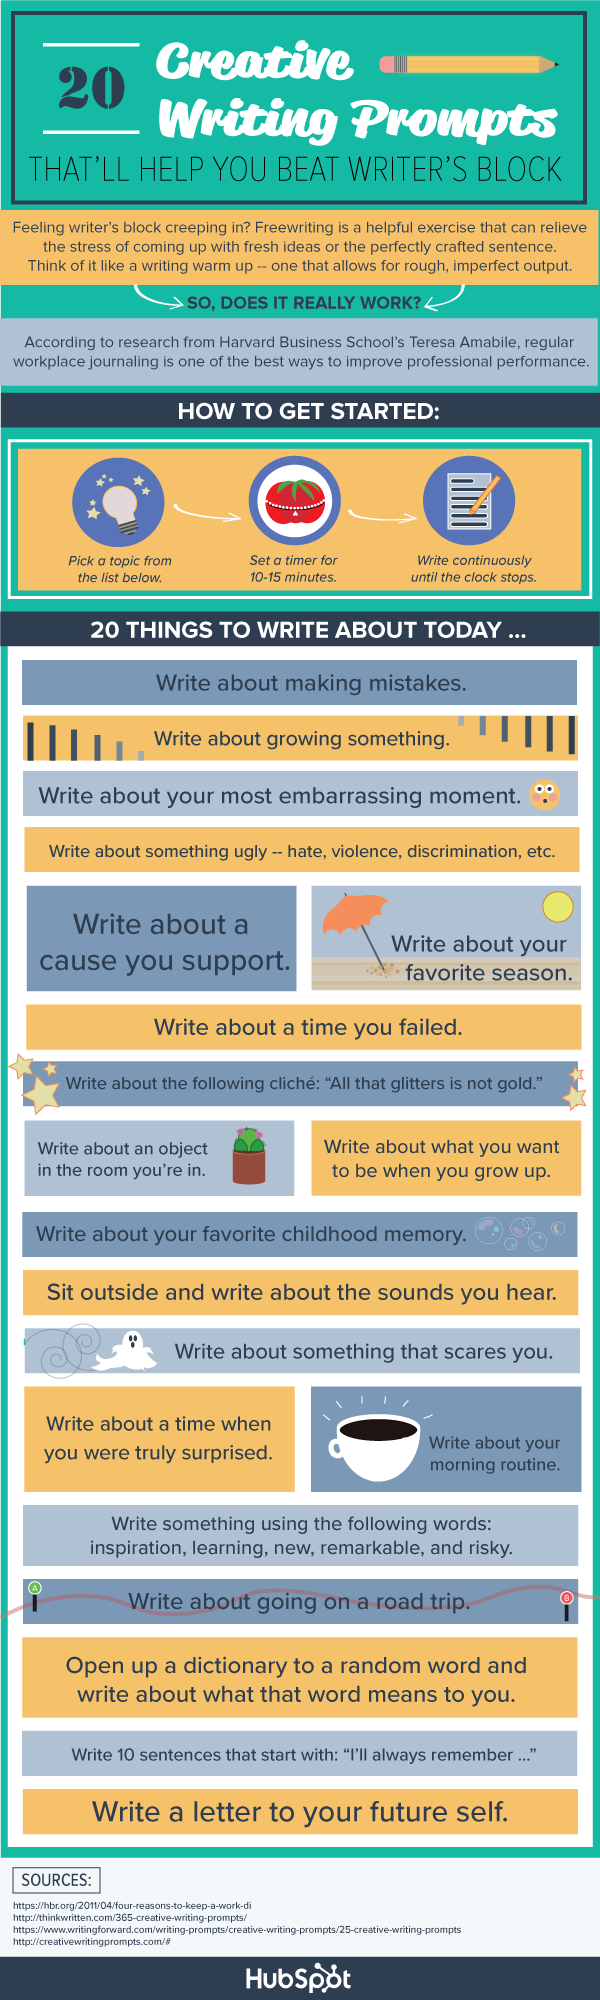 Creative-Writing-Prompts-Infographic